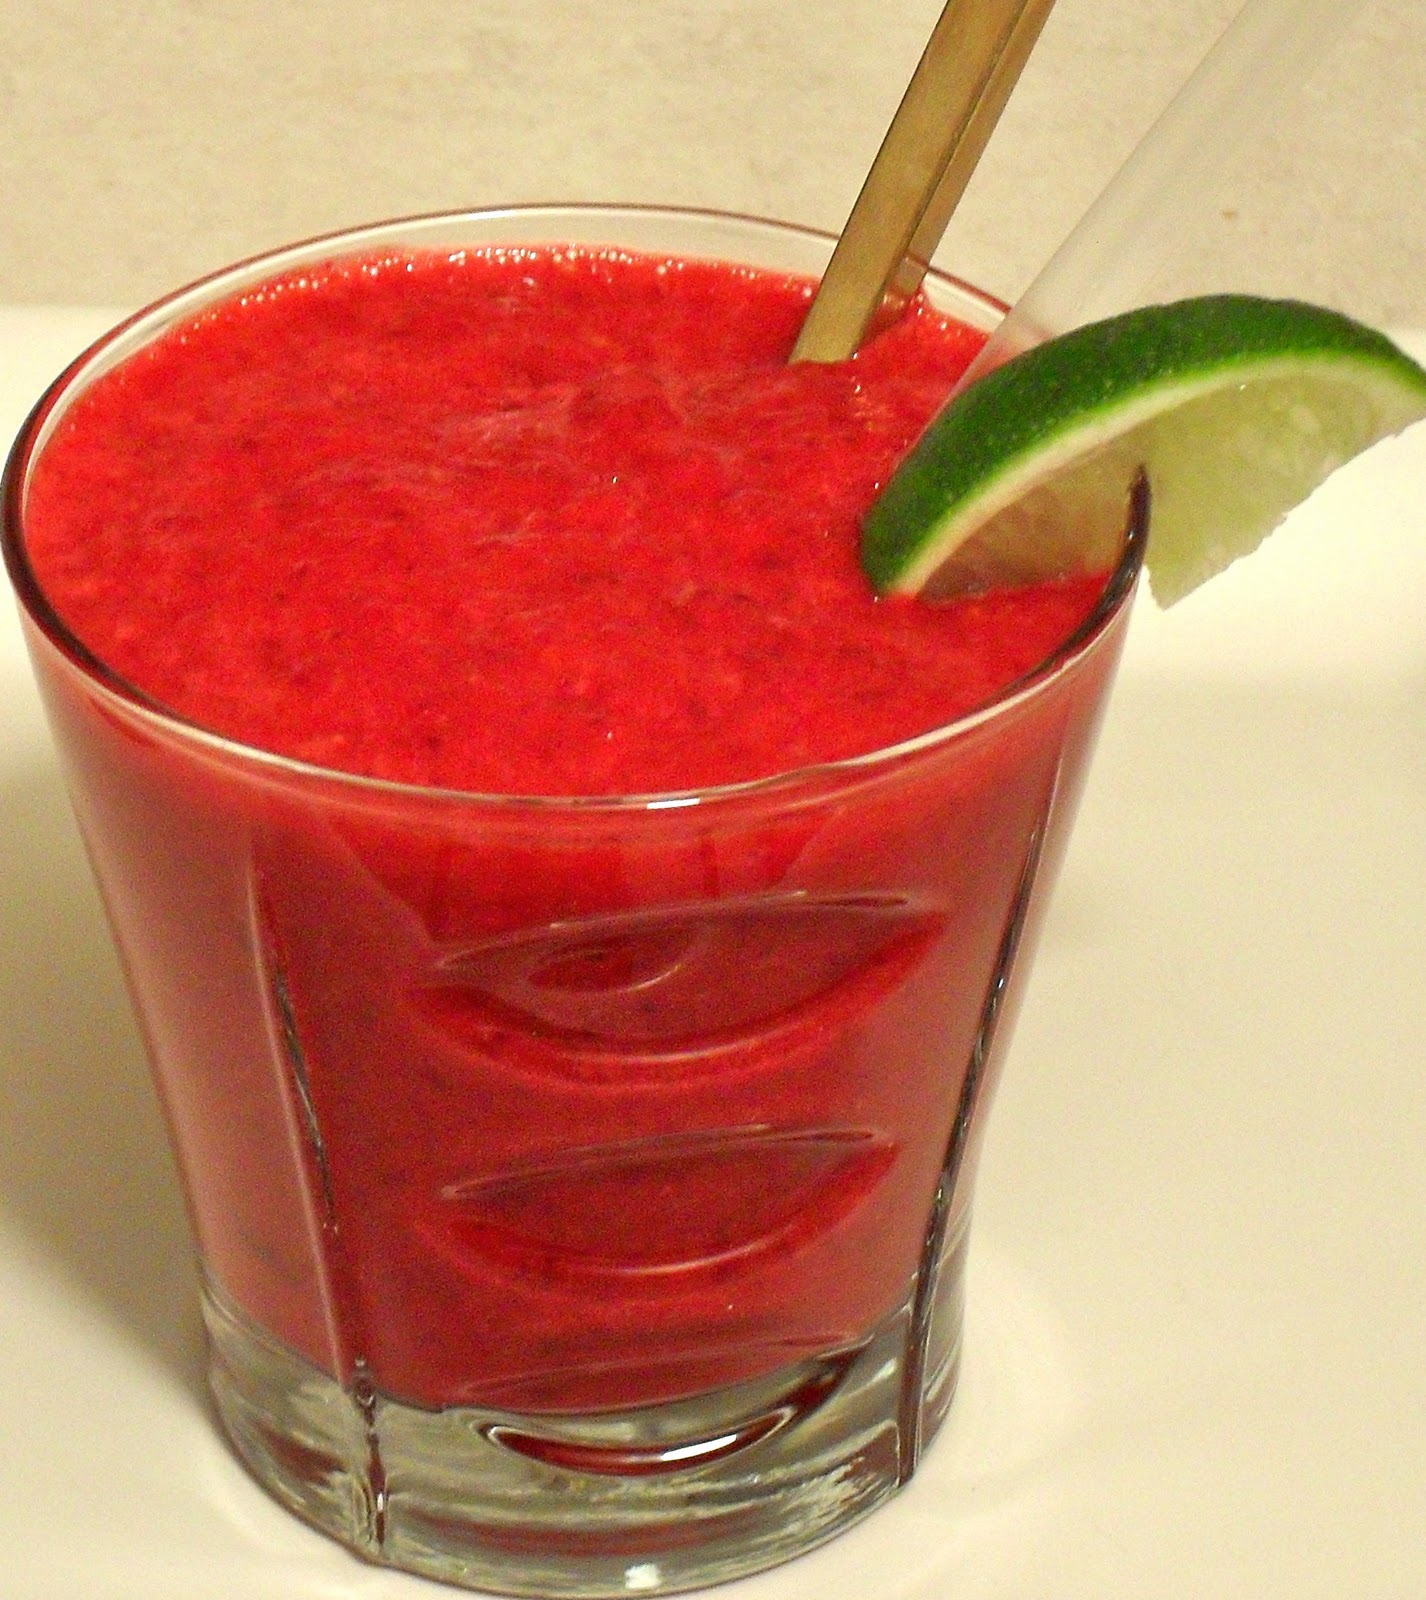 beet suite: Beet, strawberry and purple yam smoothie